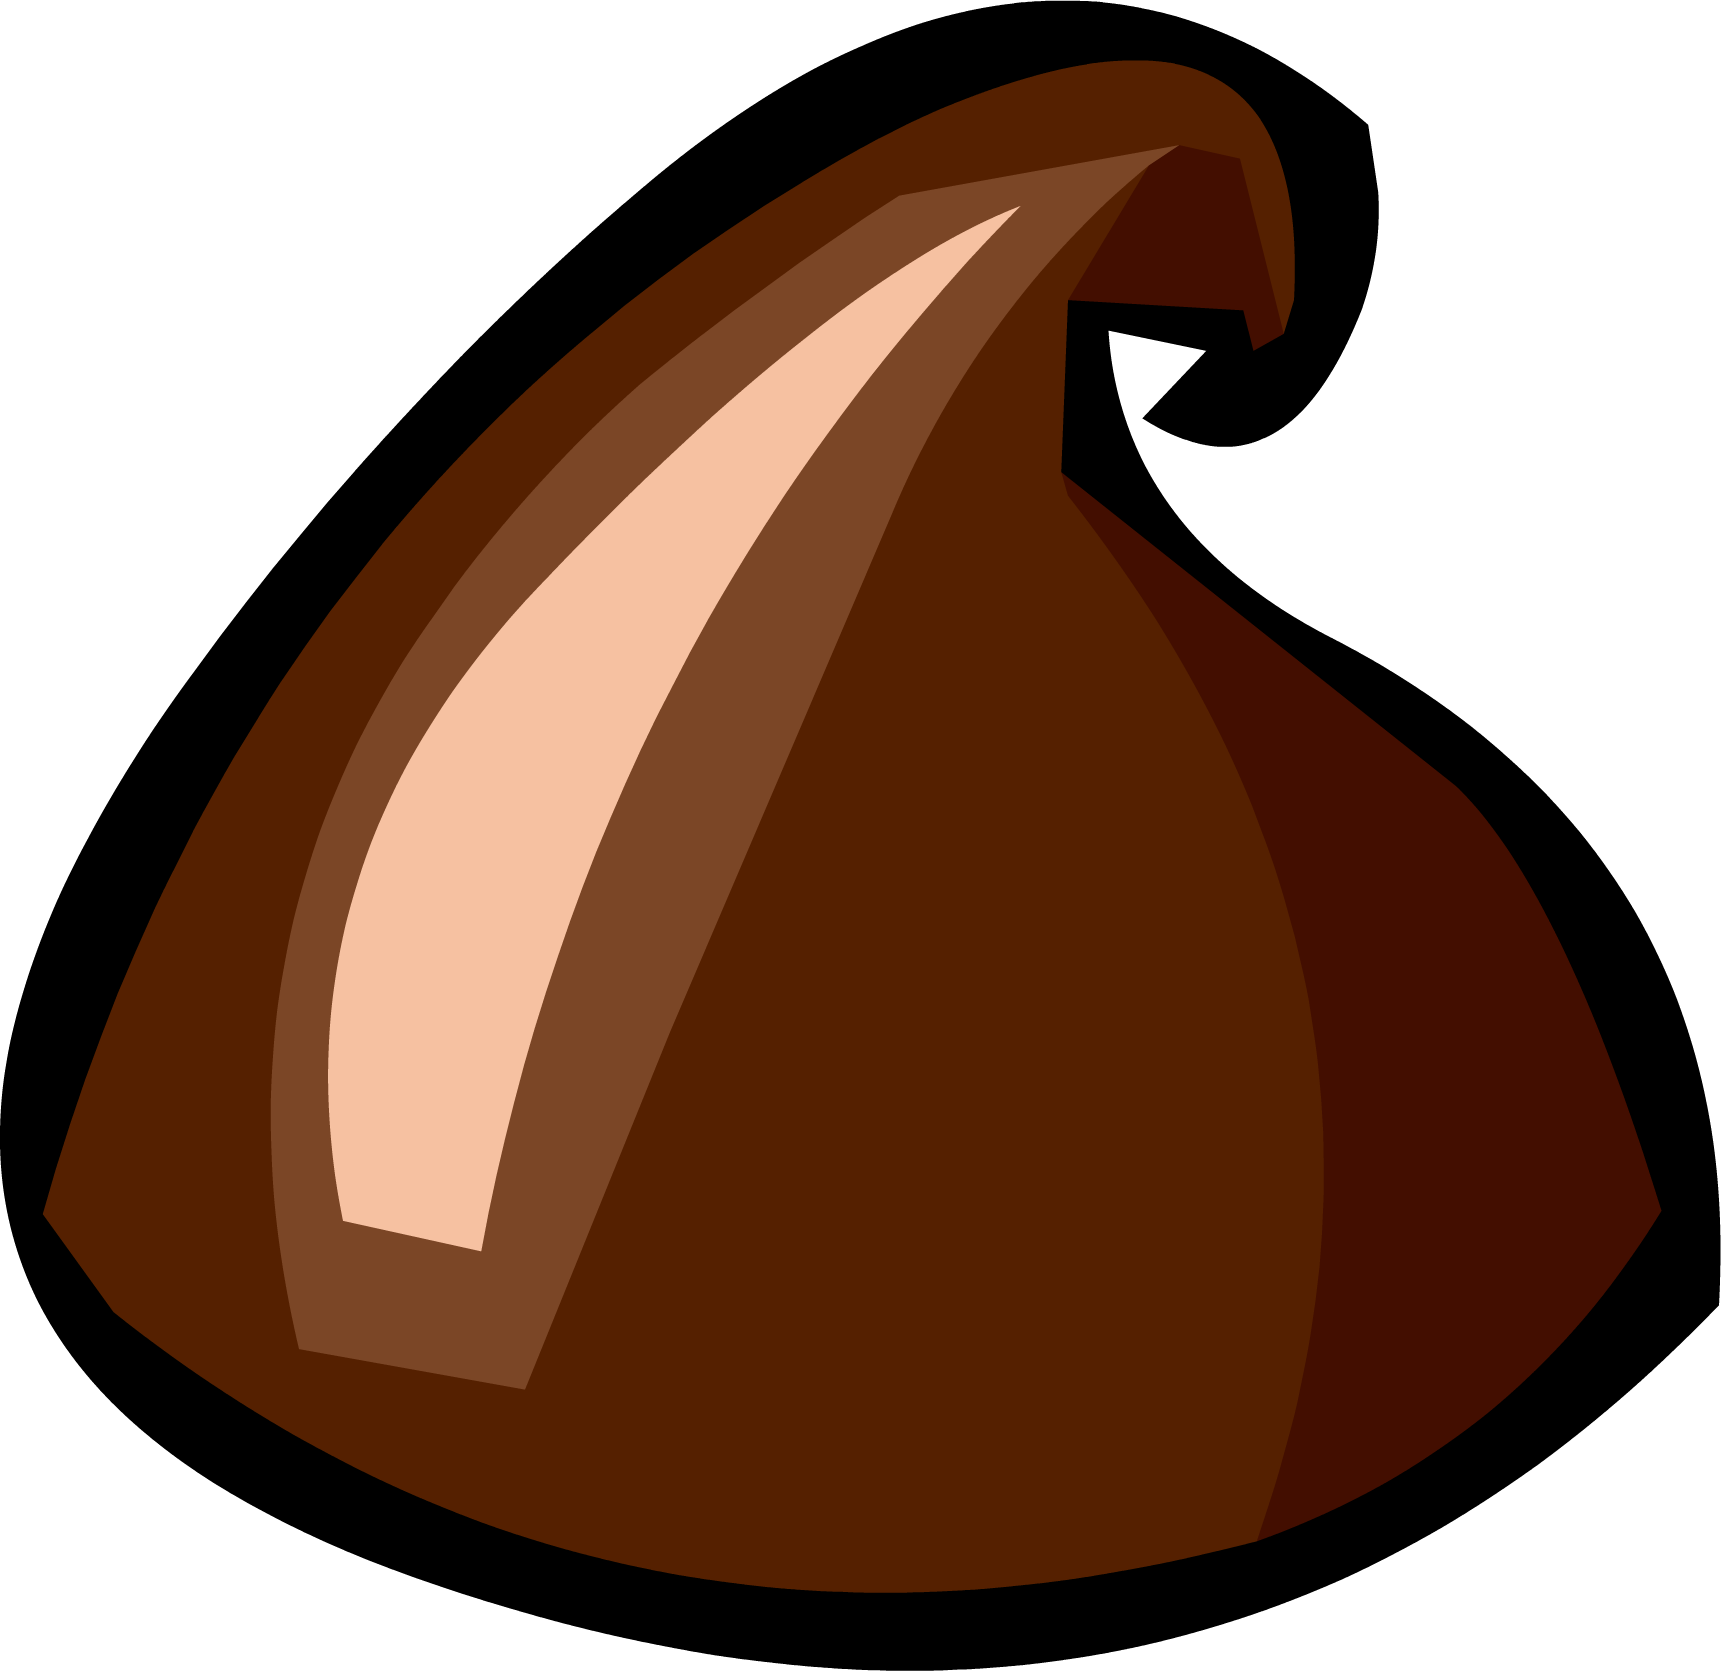 Club Penguin Wiki - Chocolate Chips Clip Art (1721x1671)